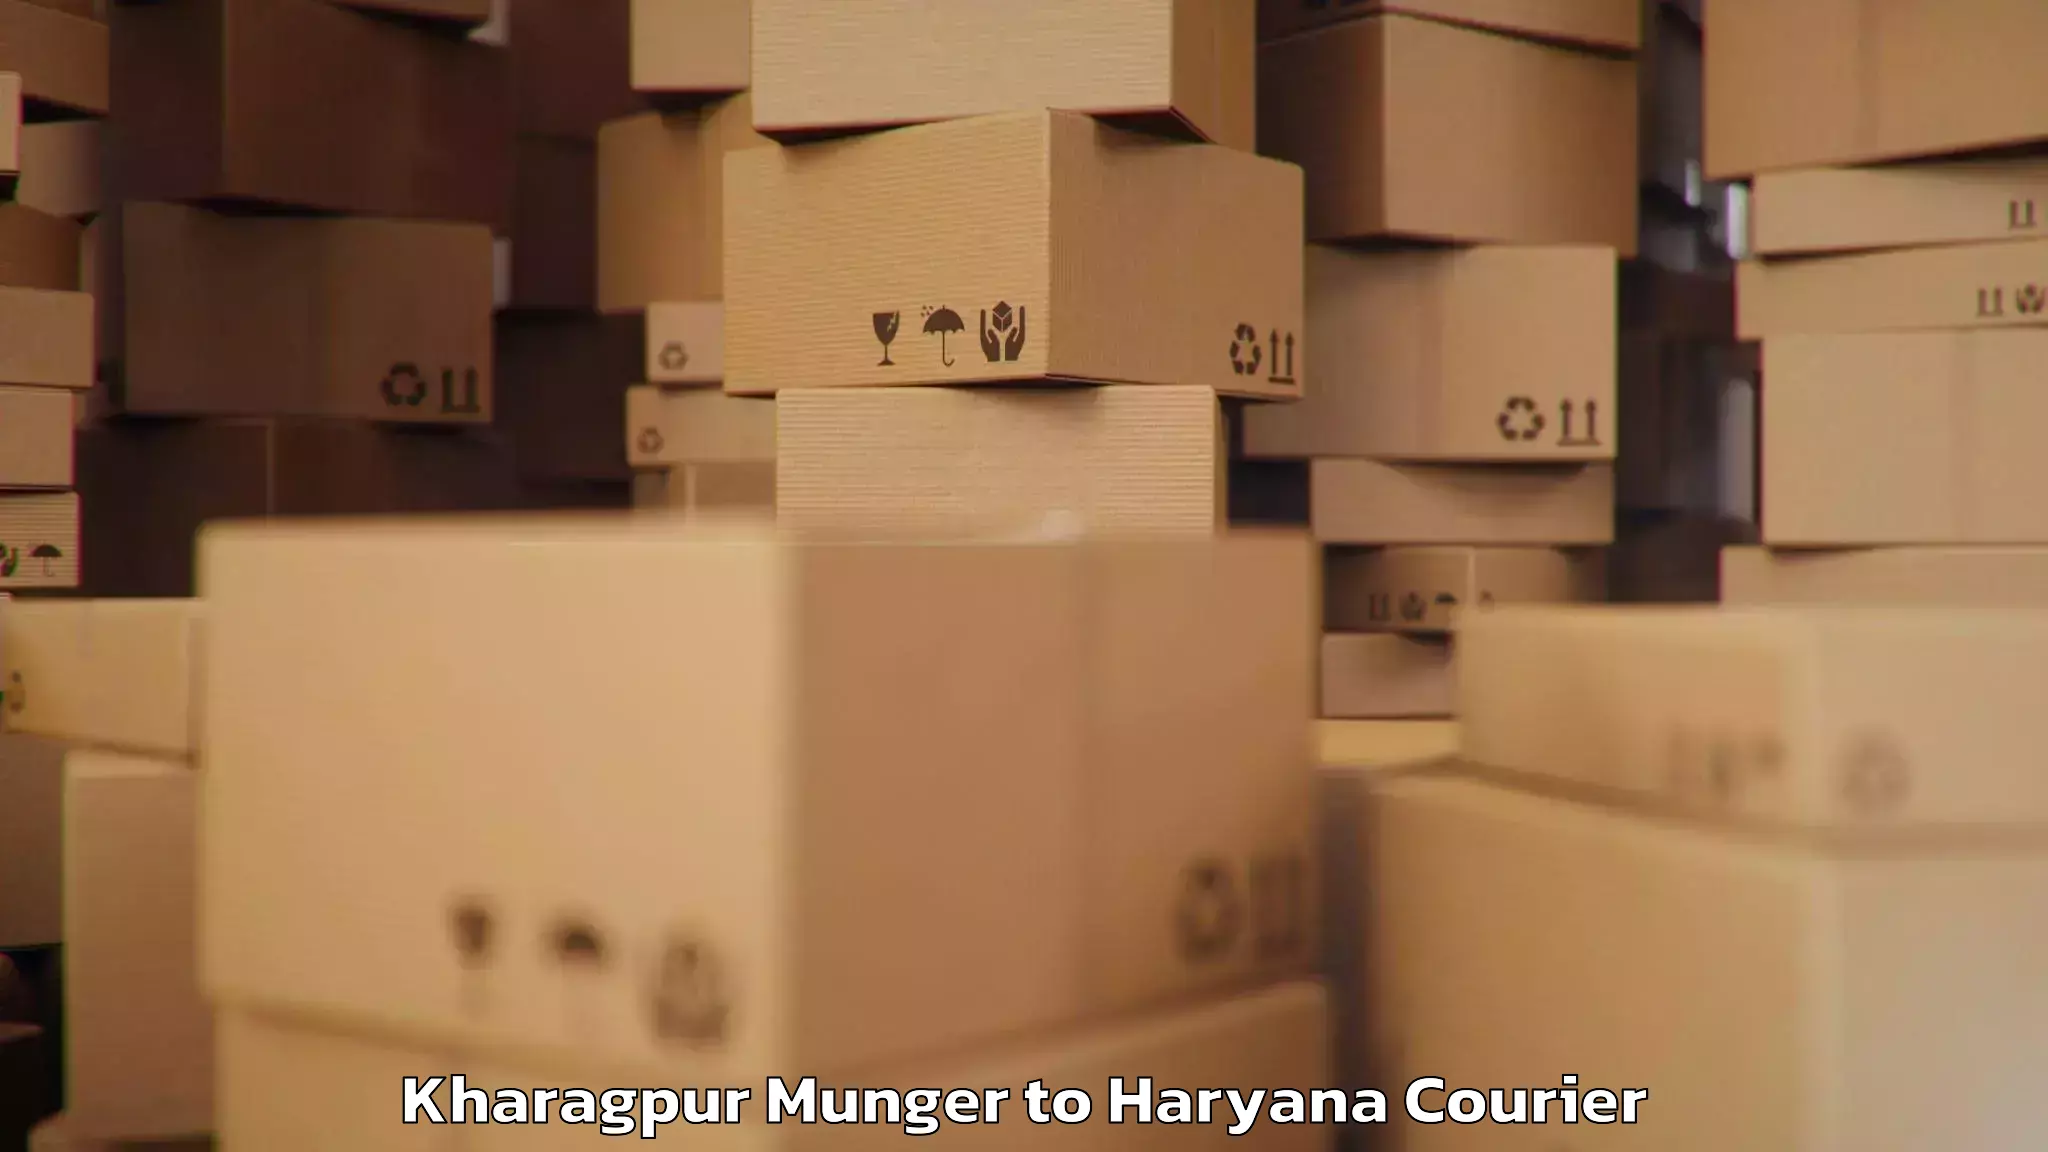 Personal effects shipping Kharagpur Munger to Pinjore